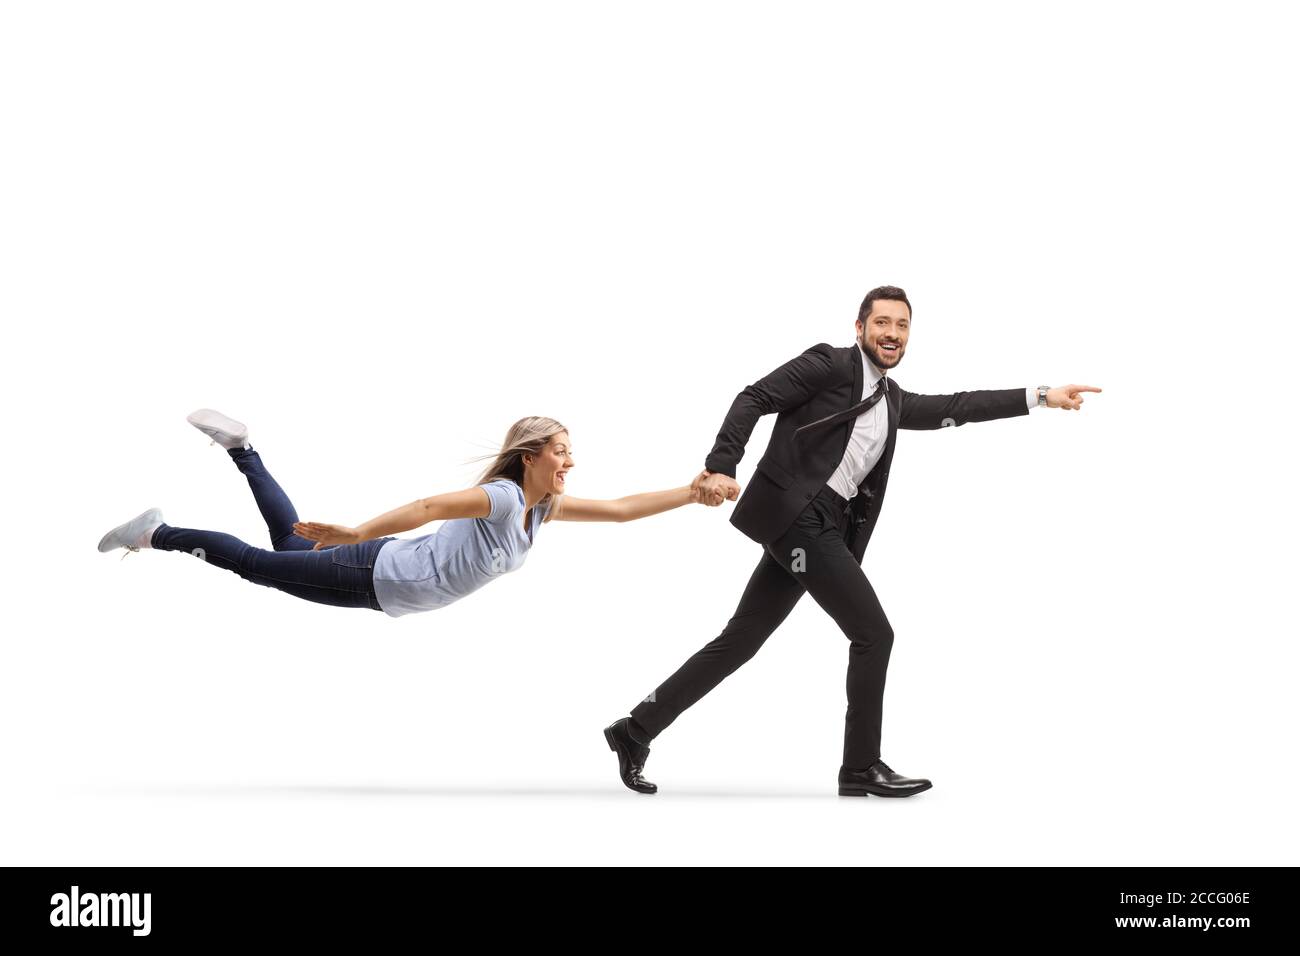 Full length profile shot of a man in a suit running and pulling a woman by the hand isolated on white background Stock Photo